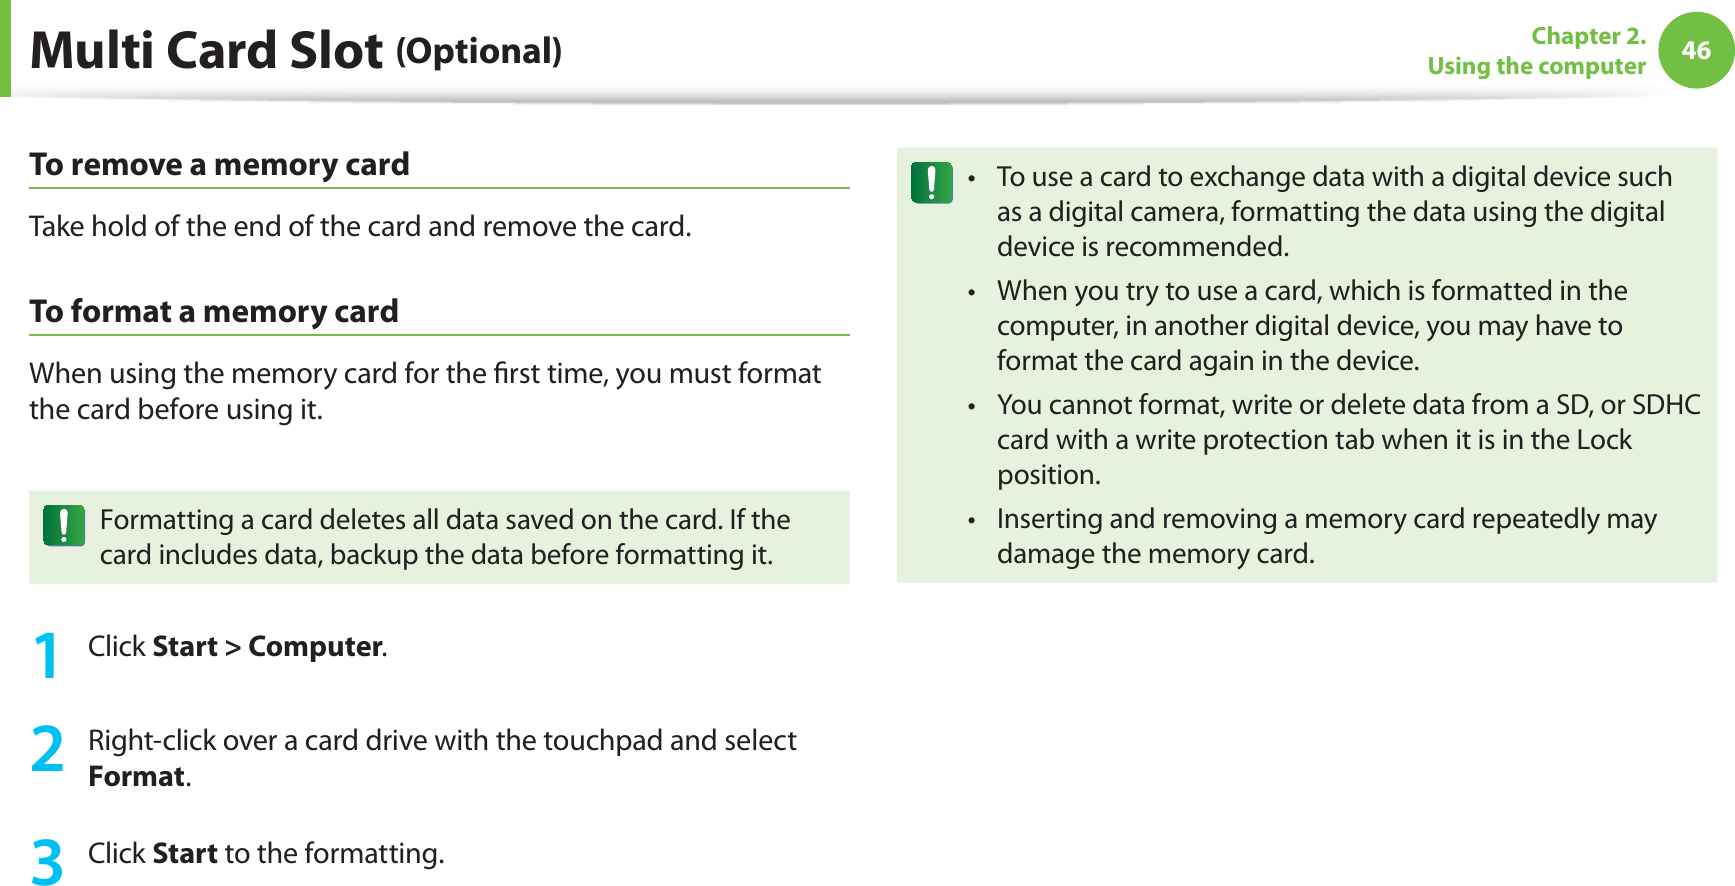 46Chapter 2.  Using the computerMulti Card Slot (Optional)To remove a memory cardTake hold of the end of the card and remove the card.To format a memory cardWhen using the memory card for the ﬁrst time, you must format the card before using it.Formatting a card deletes all data saved on the card. If the card includes data, backup the data before formatting it.1 Click Start &gt; Computer.2  Right-click over a card drive with the touchpad and select Format.3 Click Start to the formatting.To use a card to exchange data with a digital device such t as a digital camera, formatting the data using the digital device is recommended.When you try to use a card, which is formatted in the t computer, in another digital device, you may have to format the card again in the device.You cannot format, write or delete data from a SD, or SDHC t card with a write protection tab when it is in the Lock position.Inserting and removing a memory card repeatedly may t damage the memory card.